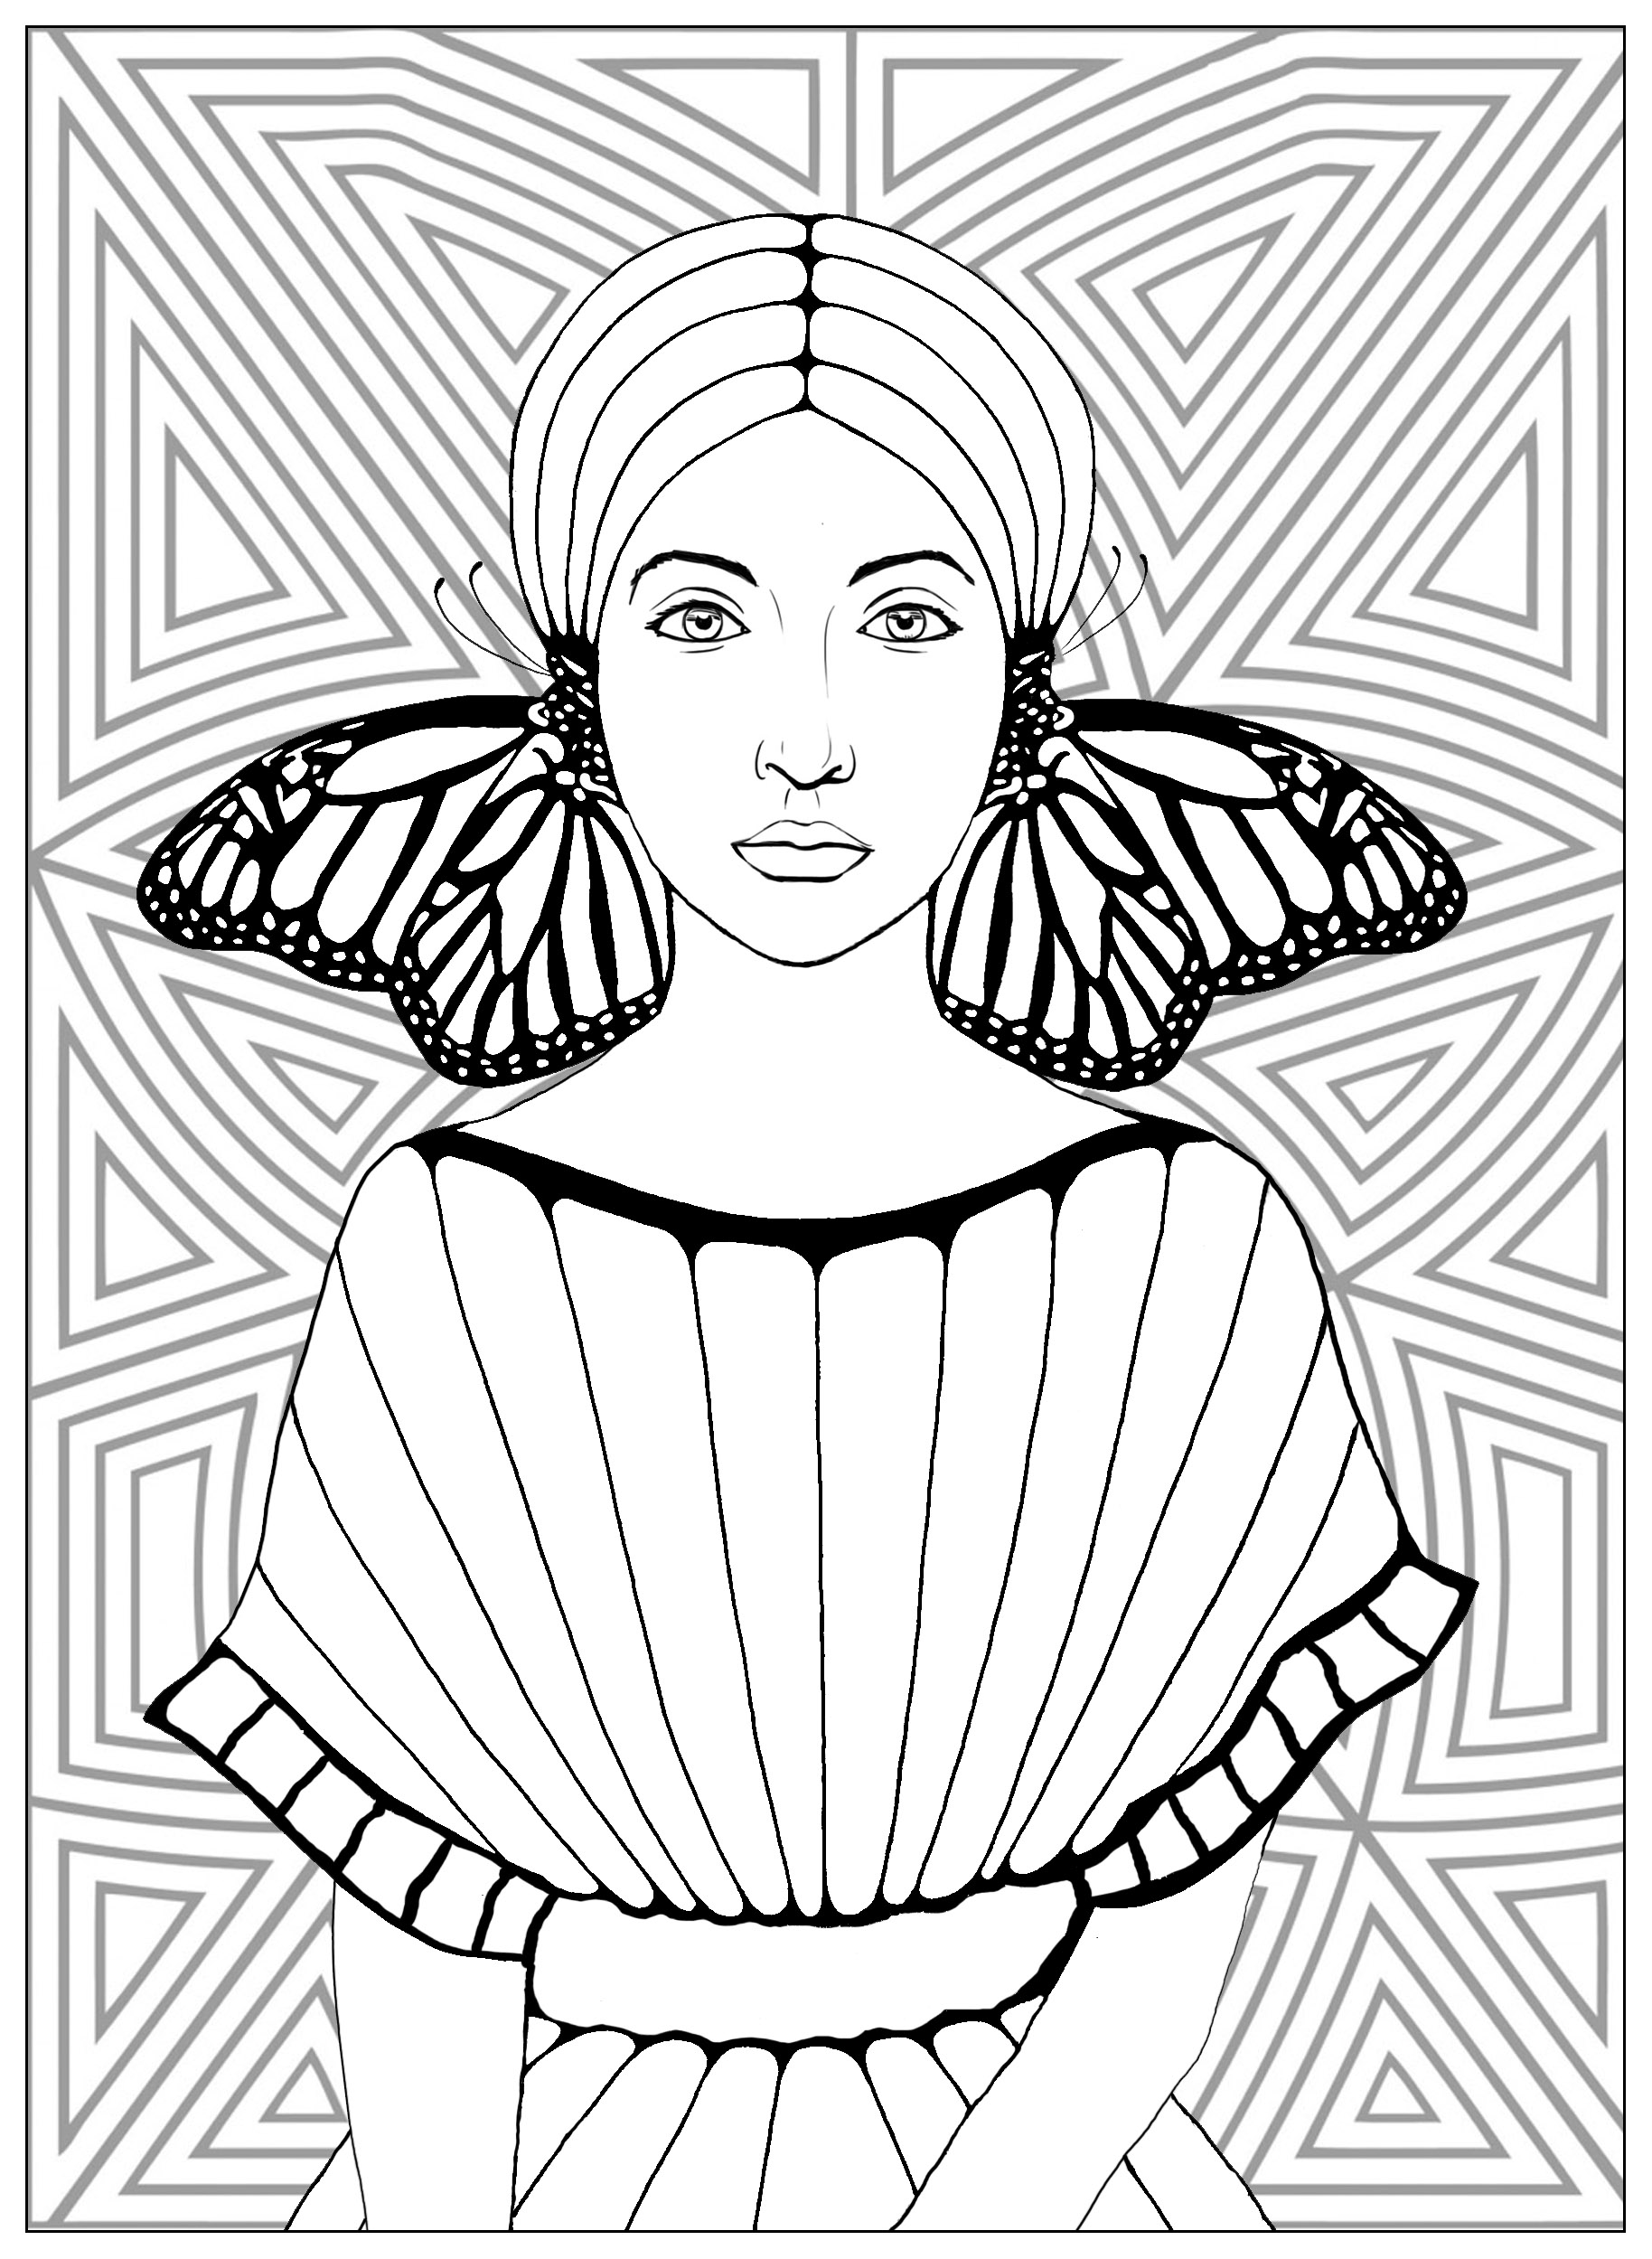 Woman with butterfly wings in earring, and nice background with geometric patterns